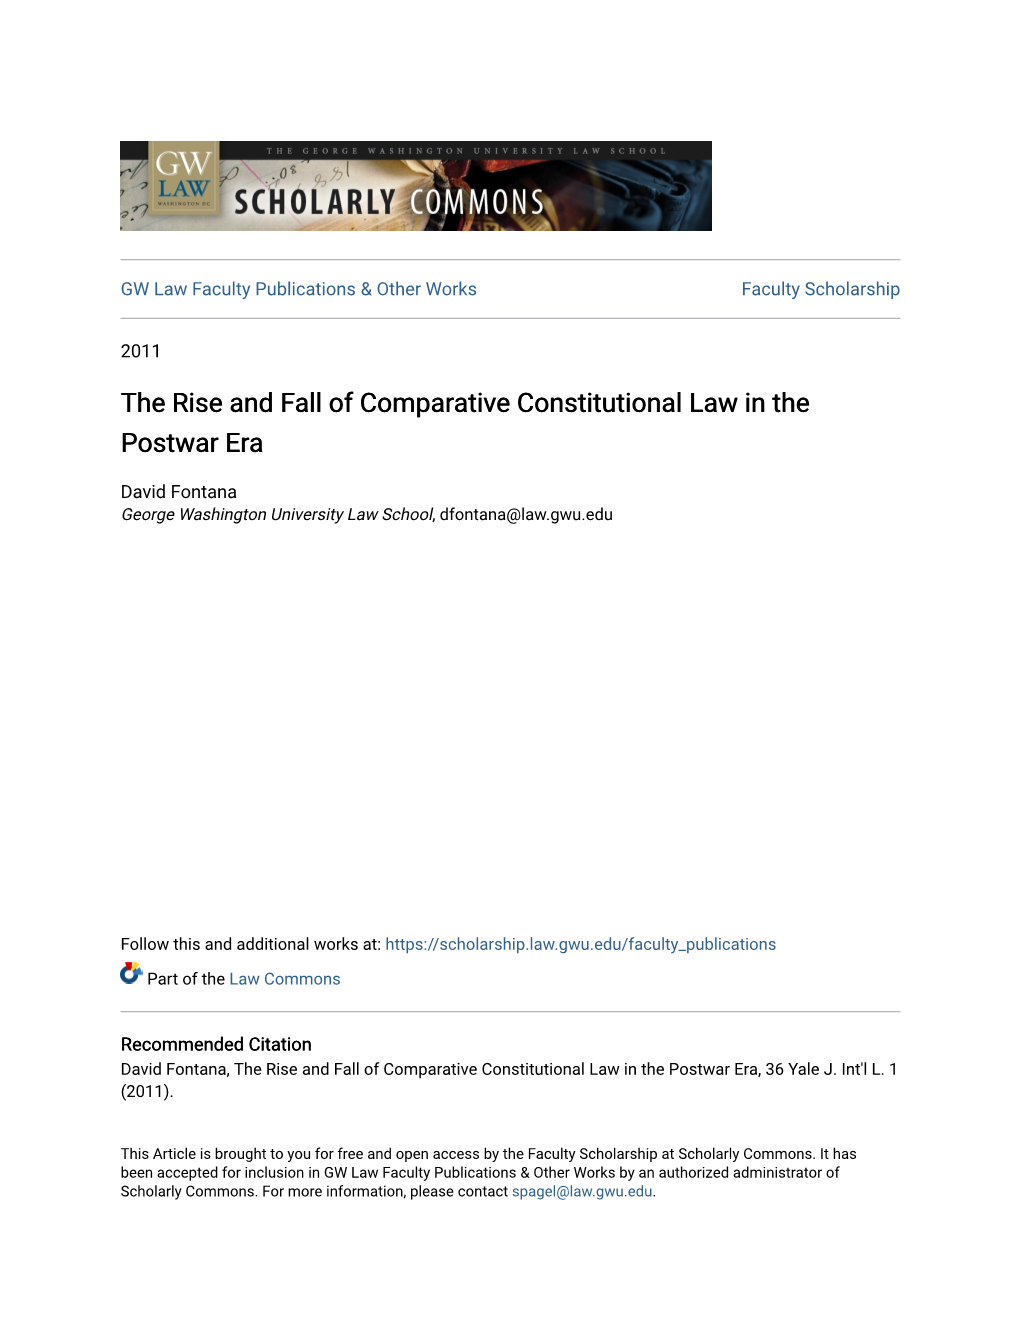 The Rise and Fall of Comparative Constitutional Law in the Postwar Era